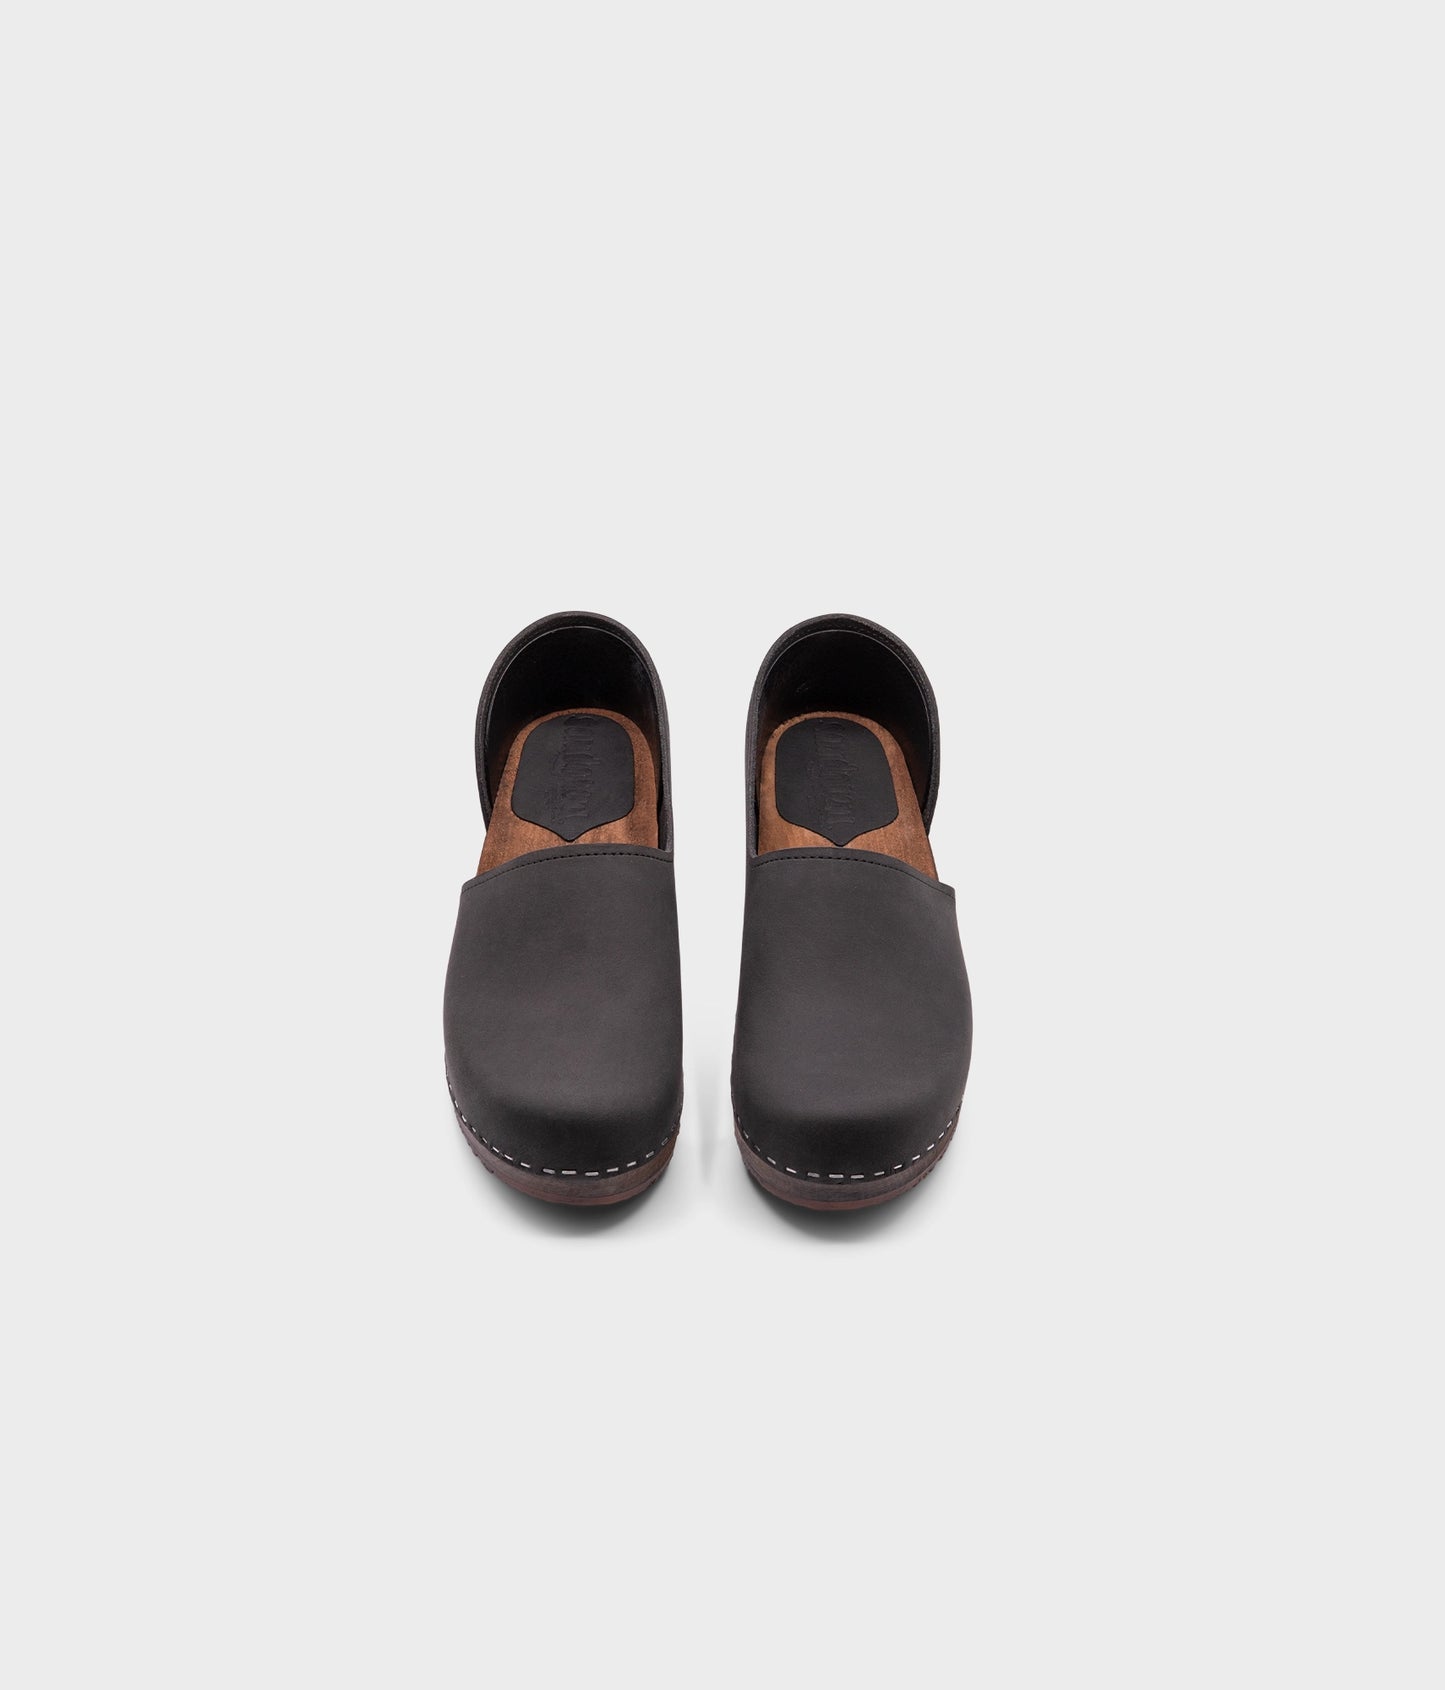 low heeled closed-back clogs in black nubuck leather stapled on a dark wooden base